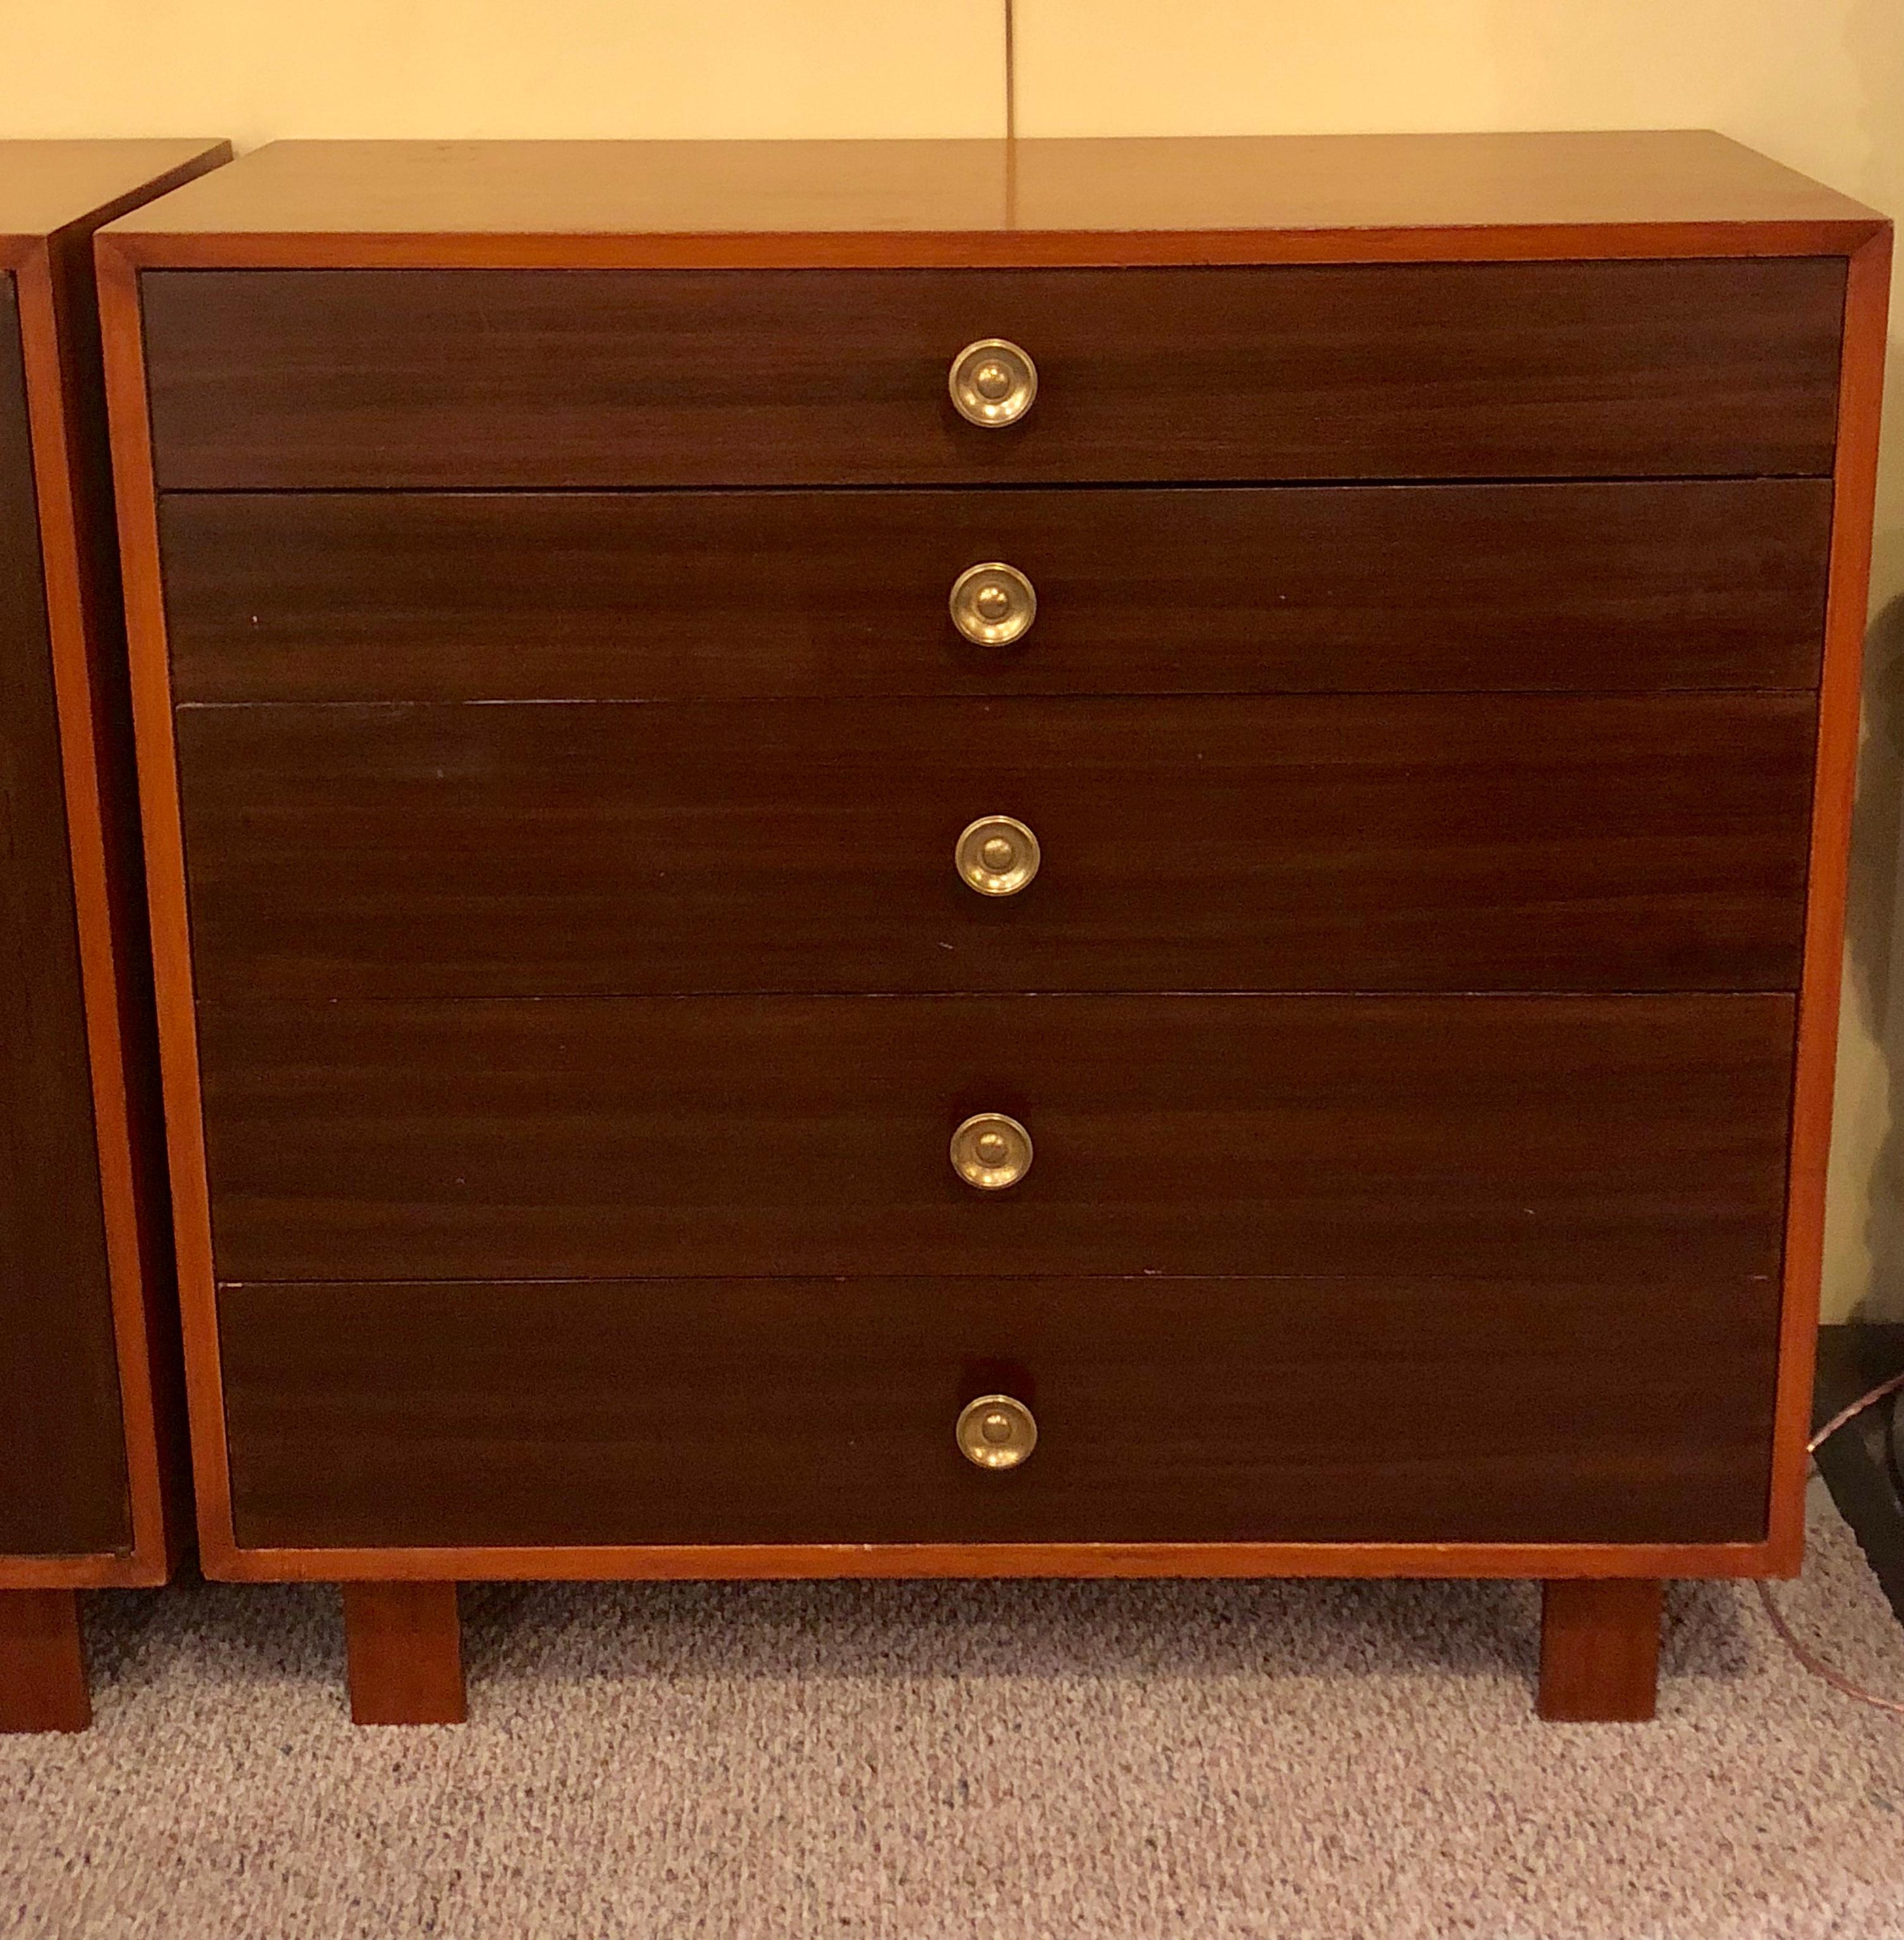 A pair of Mid-Century Modern George Nelson design for Herman Miller chests / dressers / commodes. Signed with labels this pair of side by side and all drawer chests have mahogany fronts and walnut sides with brass pulls on bracket feet.